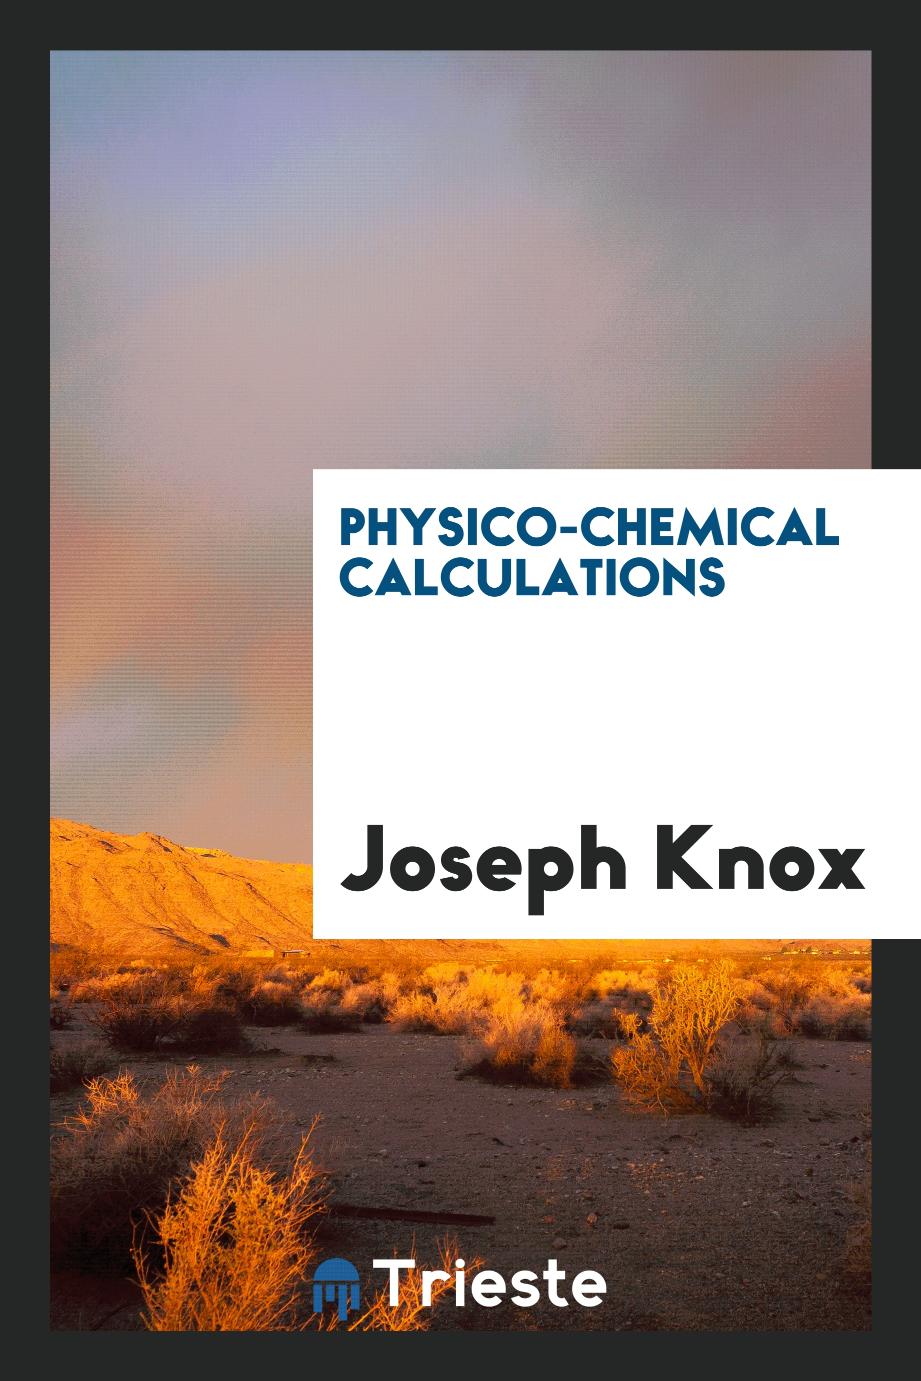 Physico-chemical calculations